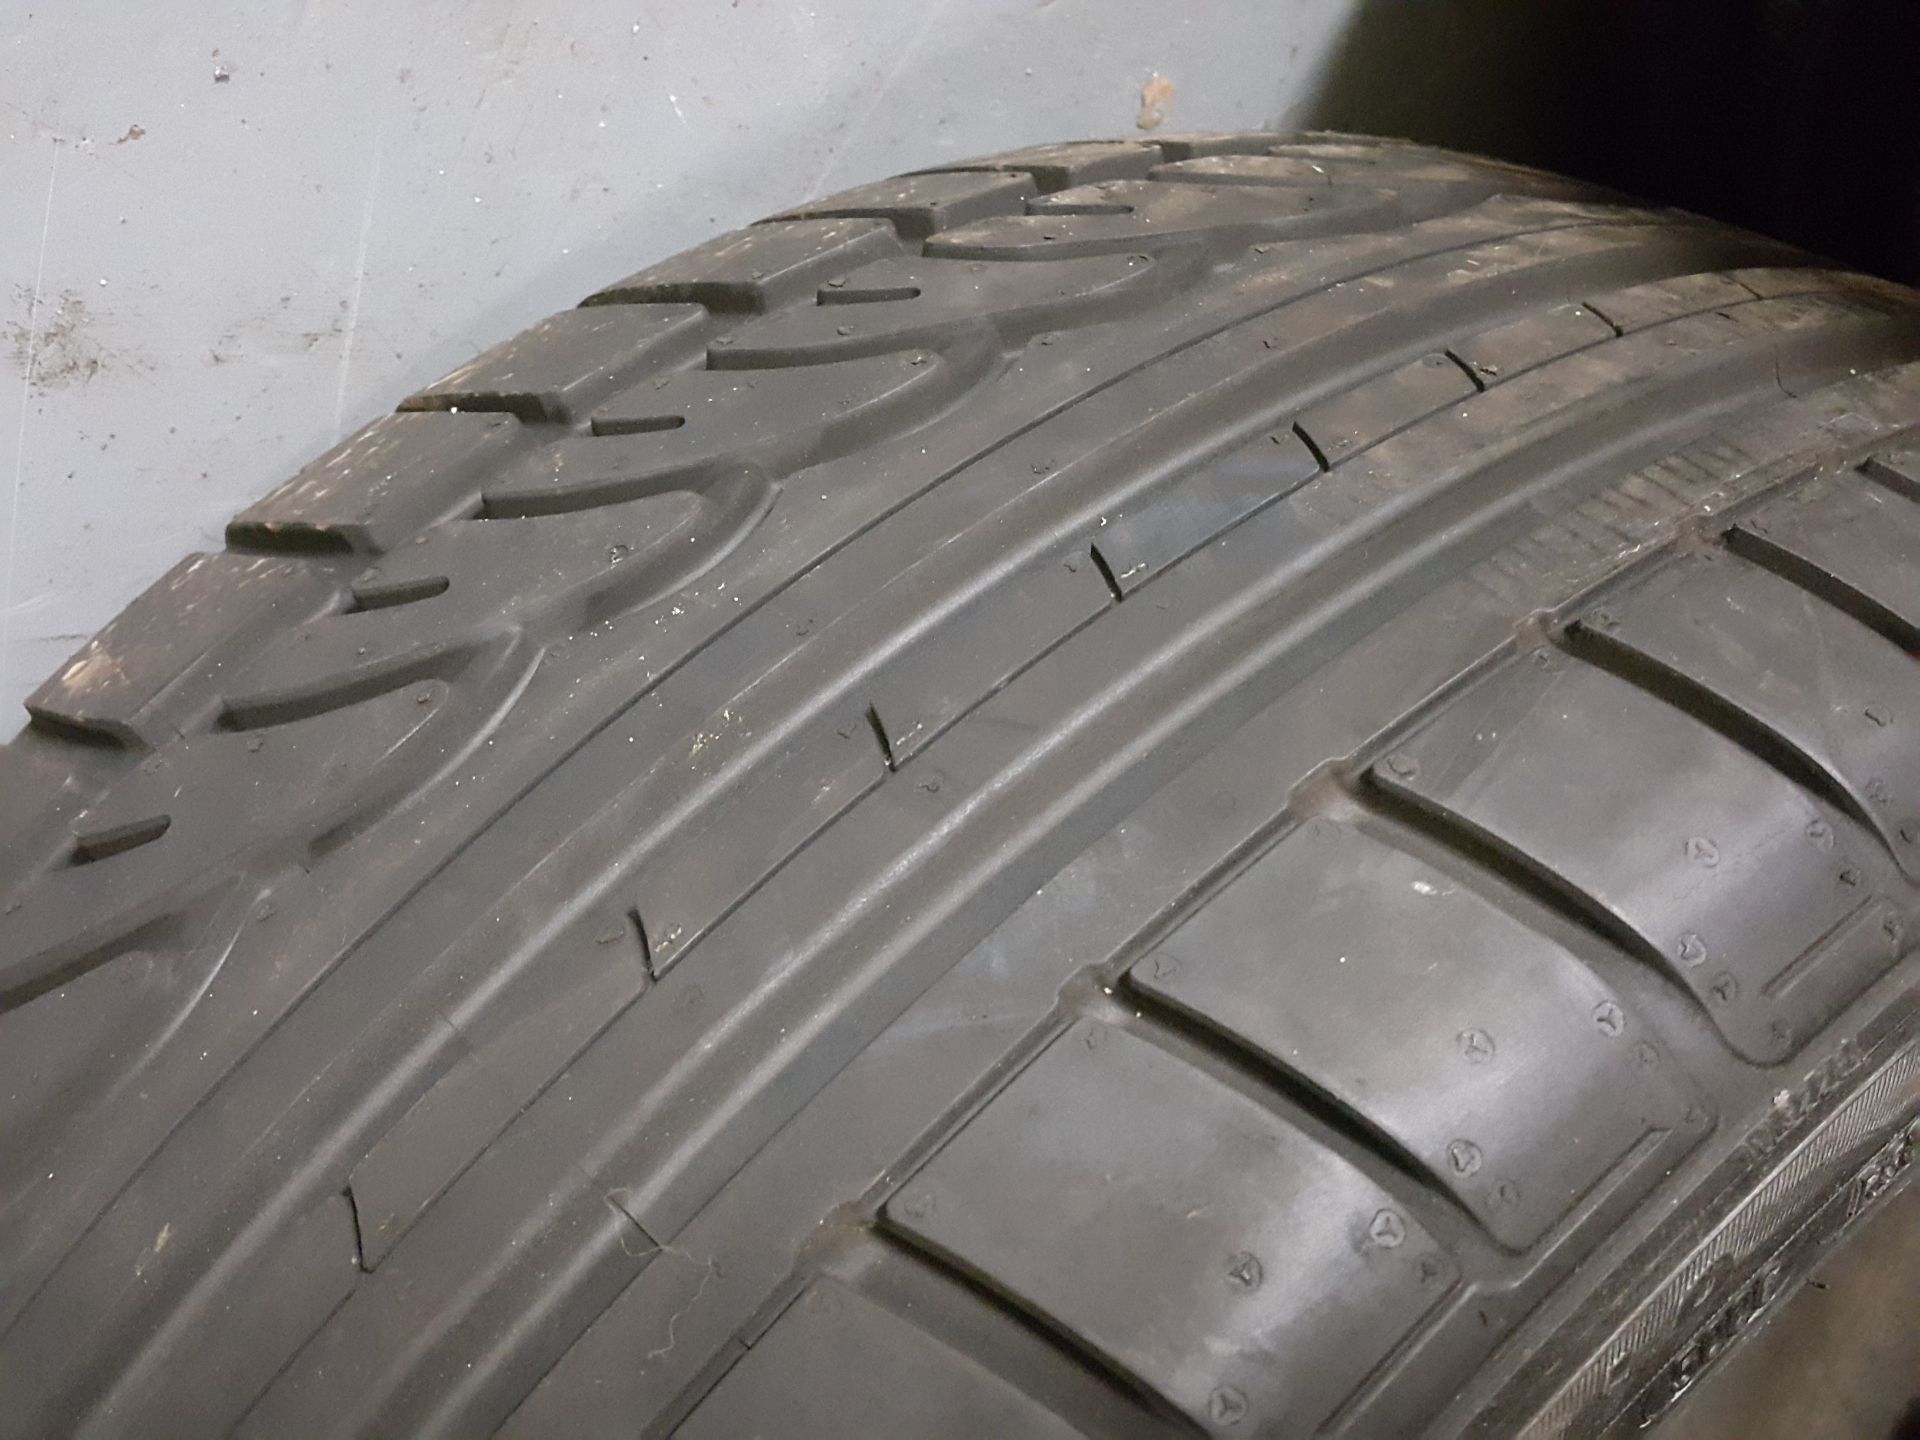 3 X DUNLOP SP SPORT TYRES AS NEW 245/40/ZR19 - Image 4 of 4